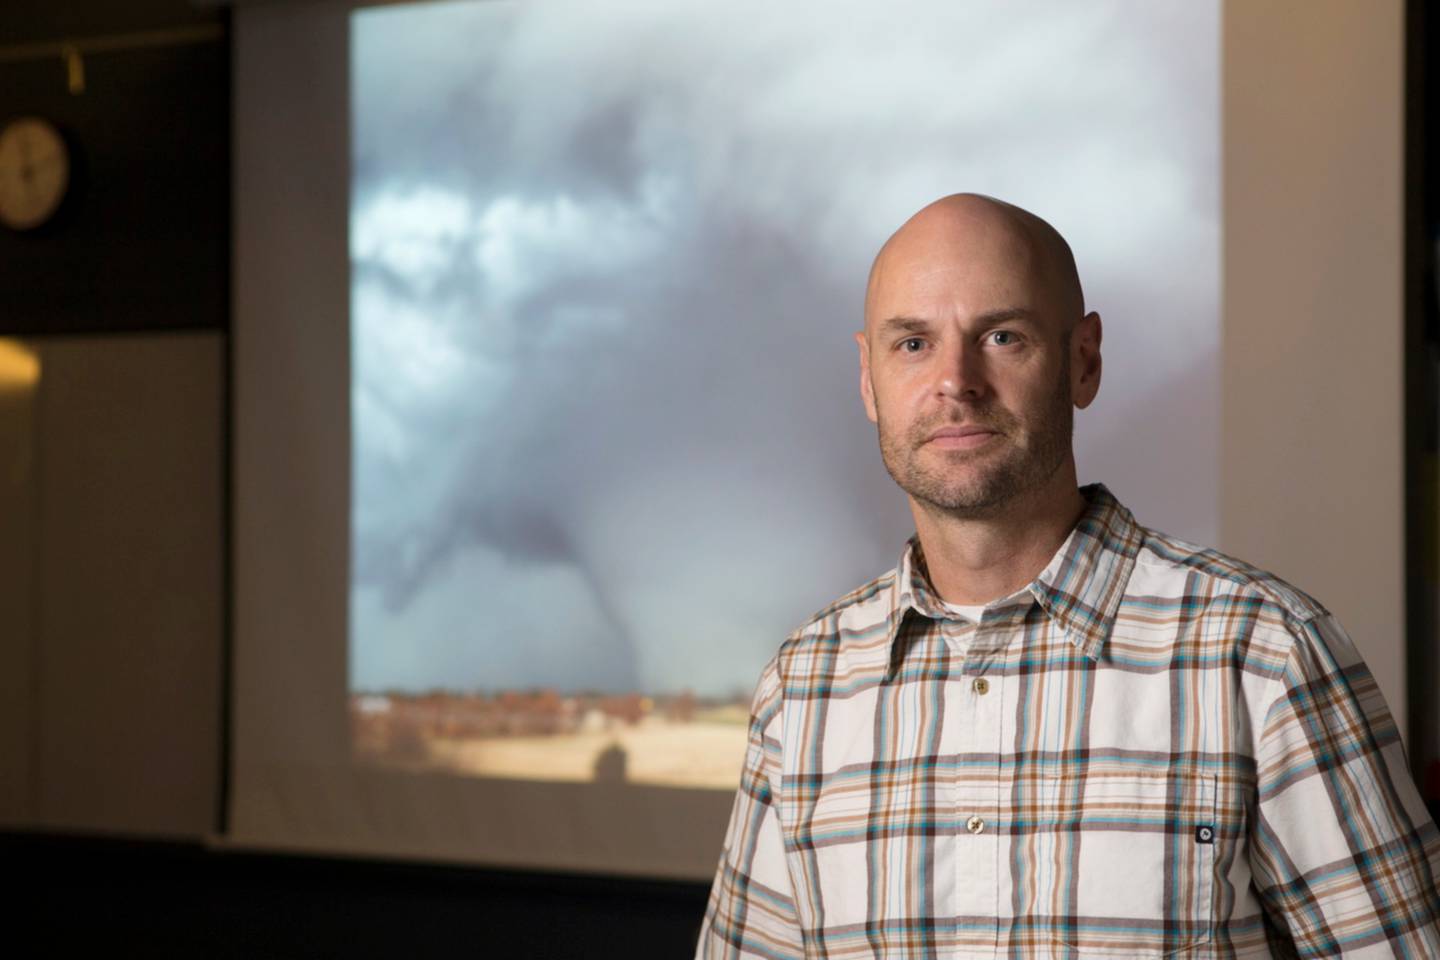 Walker Ashley, professor of meteorology and atmospheric sciences at Northern Illinois University, will share time-lapse weather imagery captured from storm chasing, satellites and radar to demonstrate rainfall patterns, tornado vulnerabilities and thunderstorm formation, at the next NIU STEM Café on March 16, 2022.